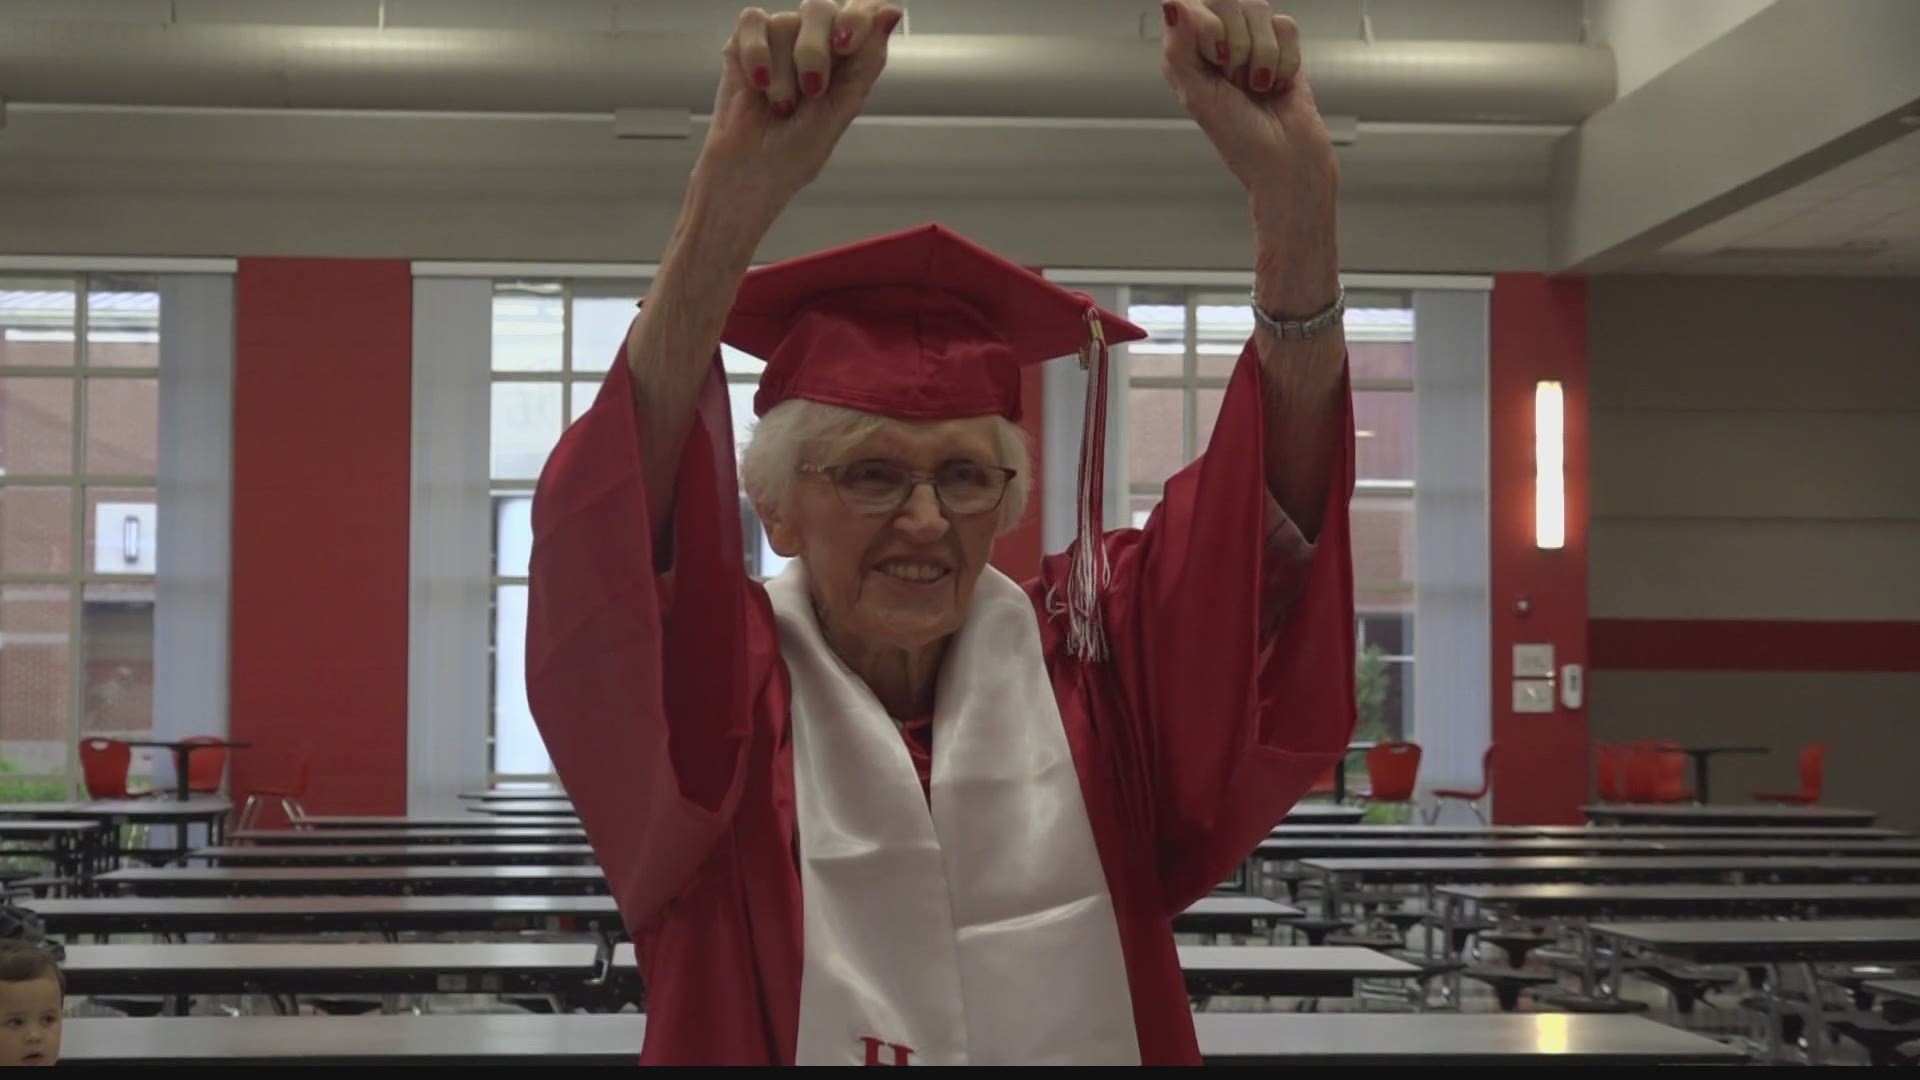 Madison County Schools was able to surprise Smith with her diploma on Wednesday.